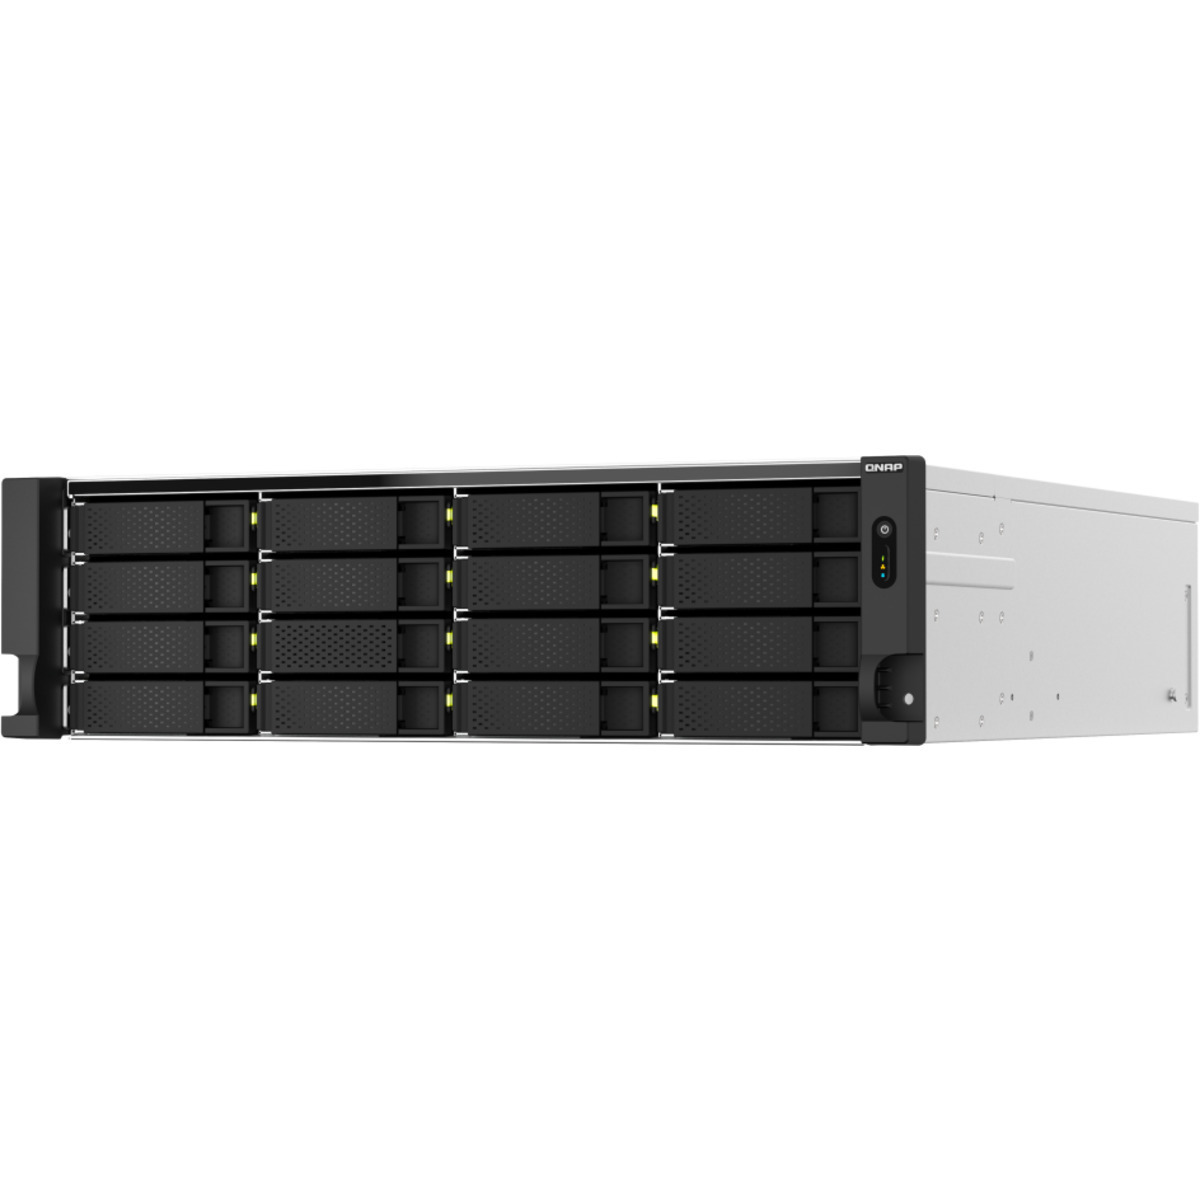 QNAP TS-h2287XU-RP E-2336 QuTS hero Edition RackMount 16+6-Bay Large Business / Enterprise NAS - Network Attached Storage Device Burn-In Tested Configurations TS-h2287XU-RP E-2336 QuTS hero Edition